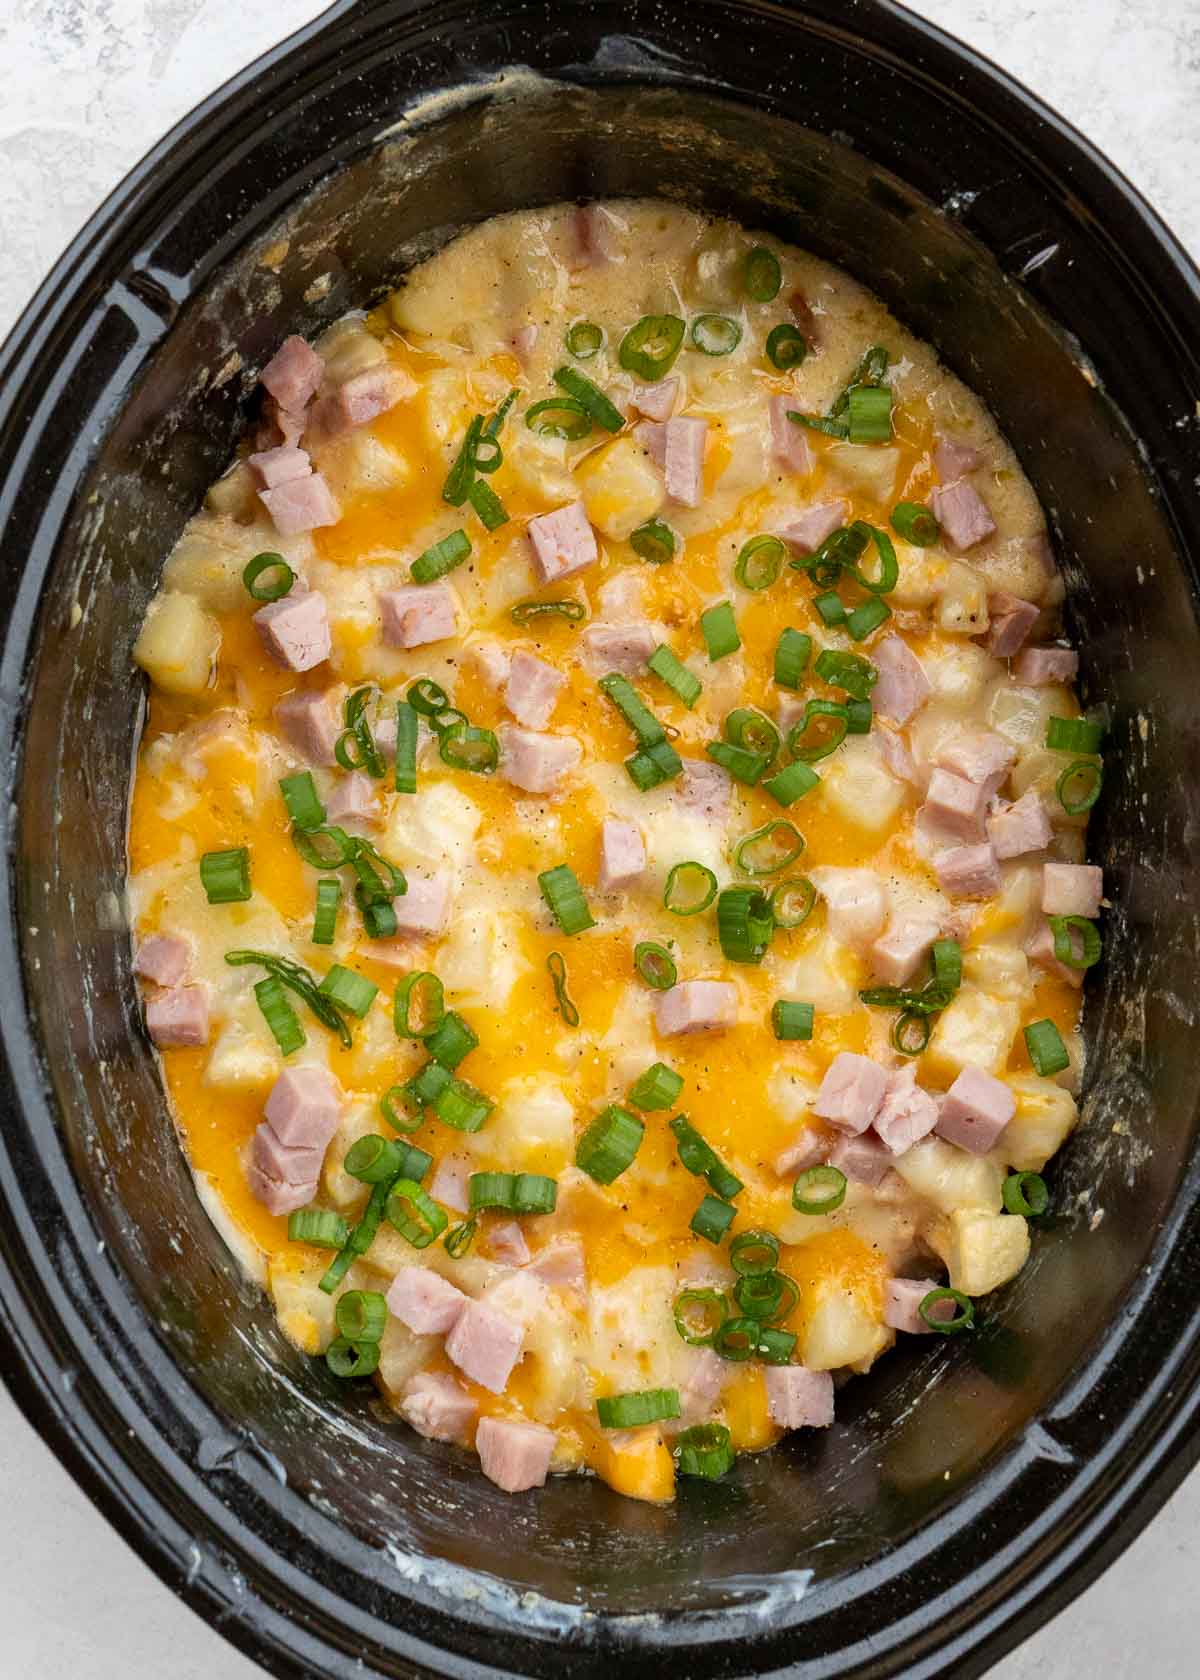 Cheesy Hashbrown Casserole is the perfect comfort food! Frozen hashbrowns are paired with sour cream, cheddar cheese, and ham to make the ultimate side dish! This simple potato recipe requires no prep work and can be made in the crock pot or oven!